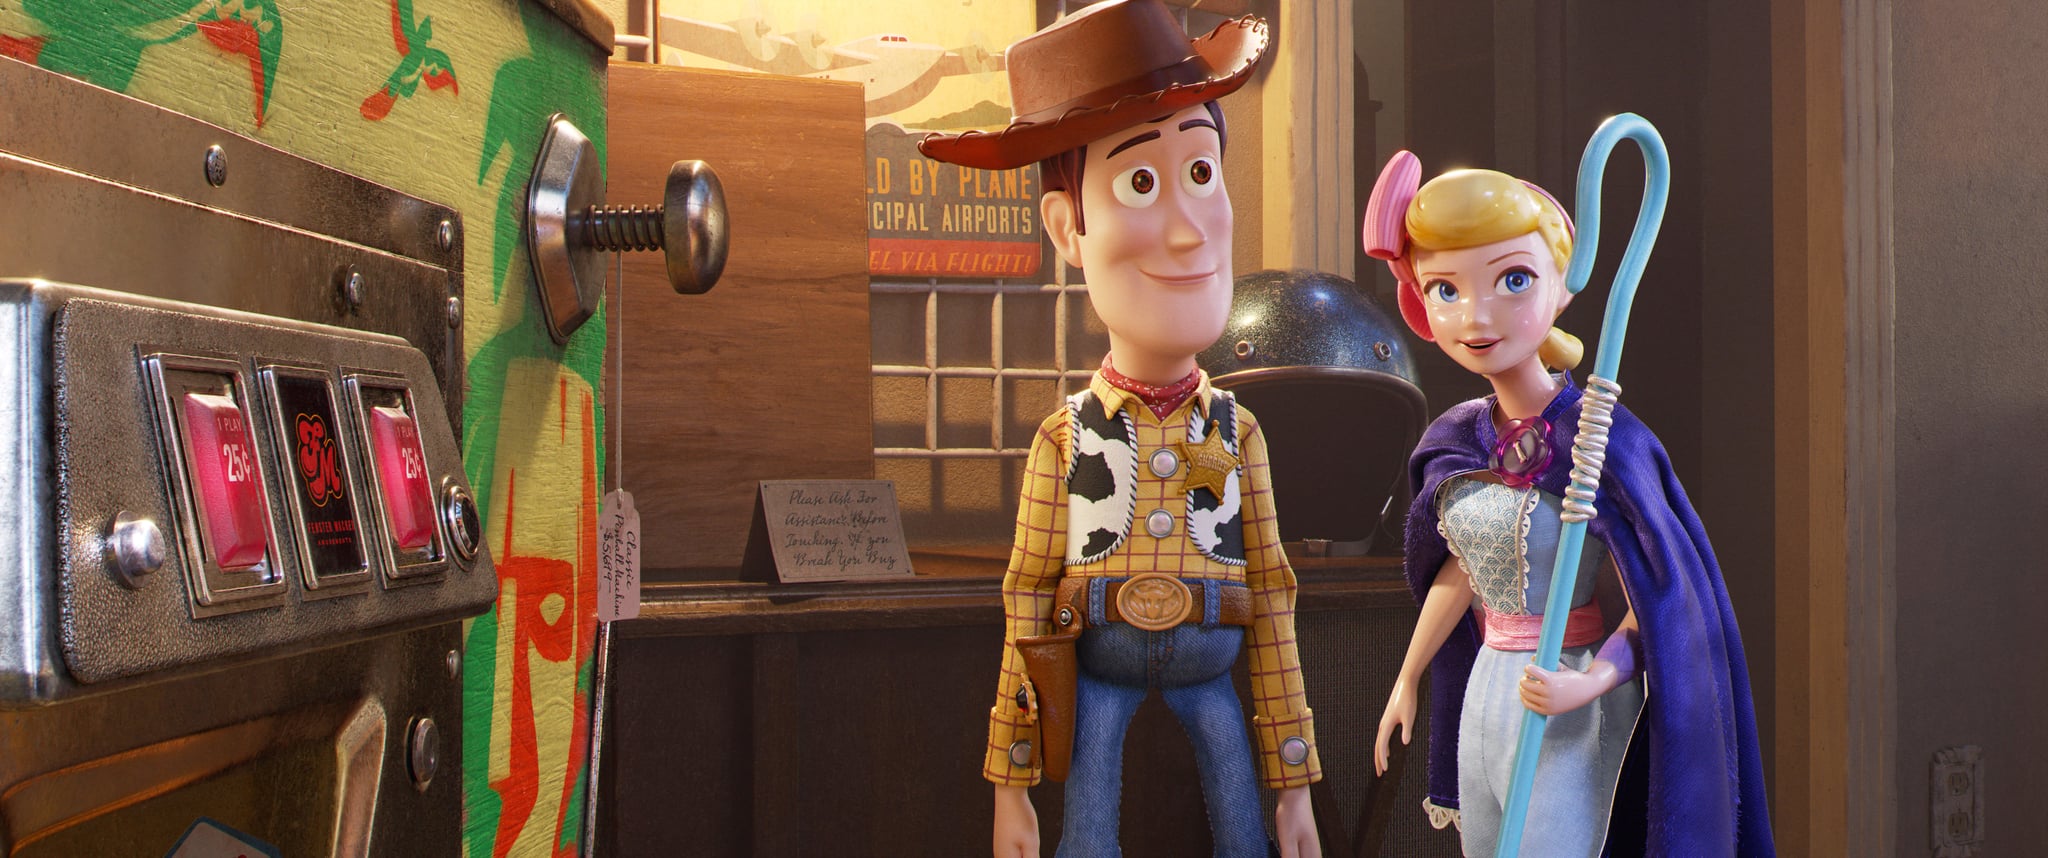 TOY STORY 4, from left: Woody (voice: Tom Hanks), Bo Peep (voice: Annie Potts), 2019.  Walt Disney Studios Motion Pictures / courtesy Everett Collection